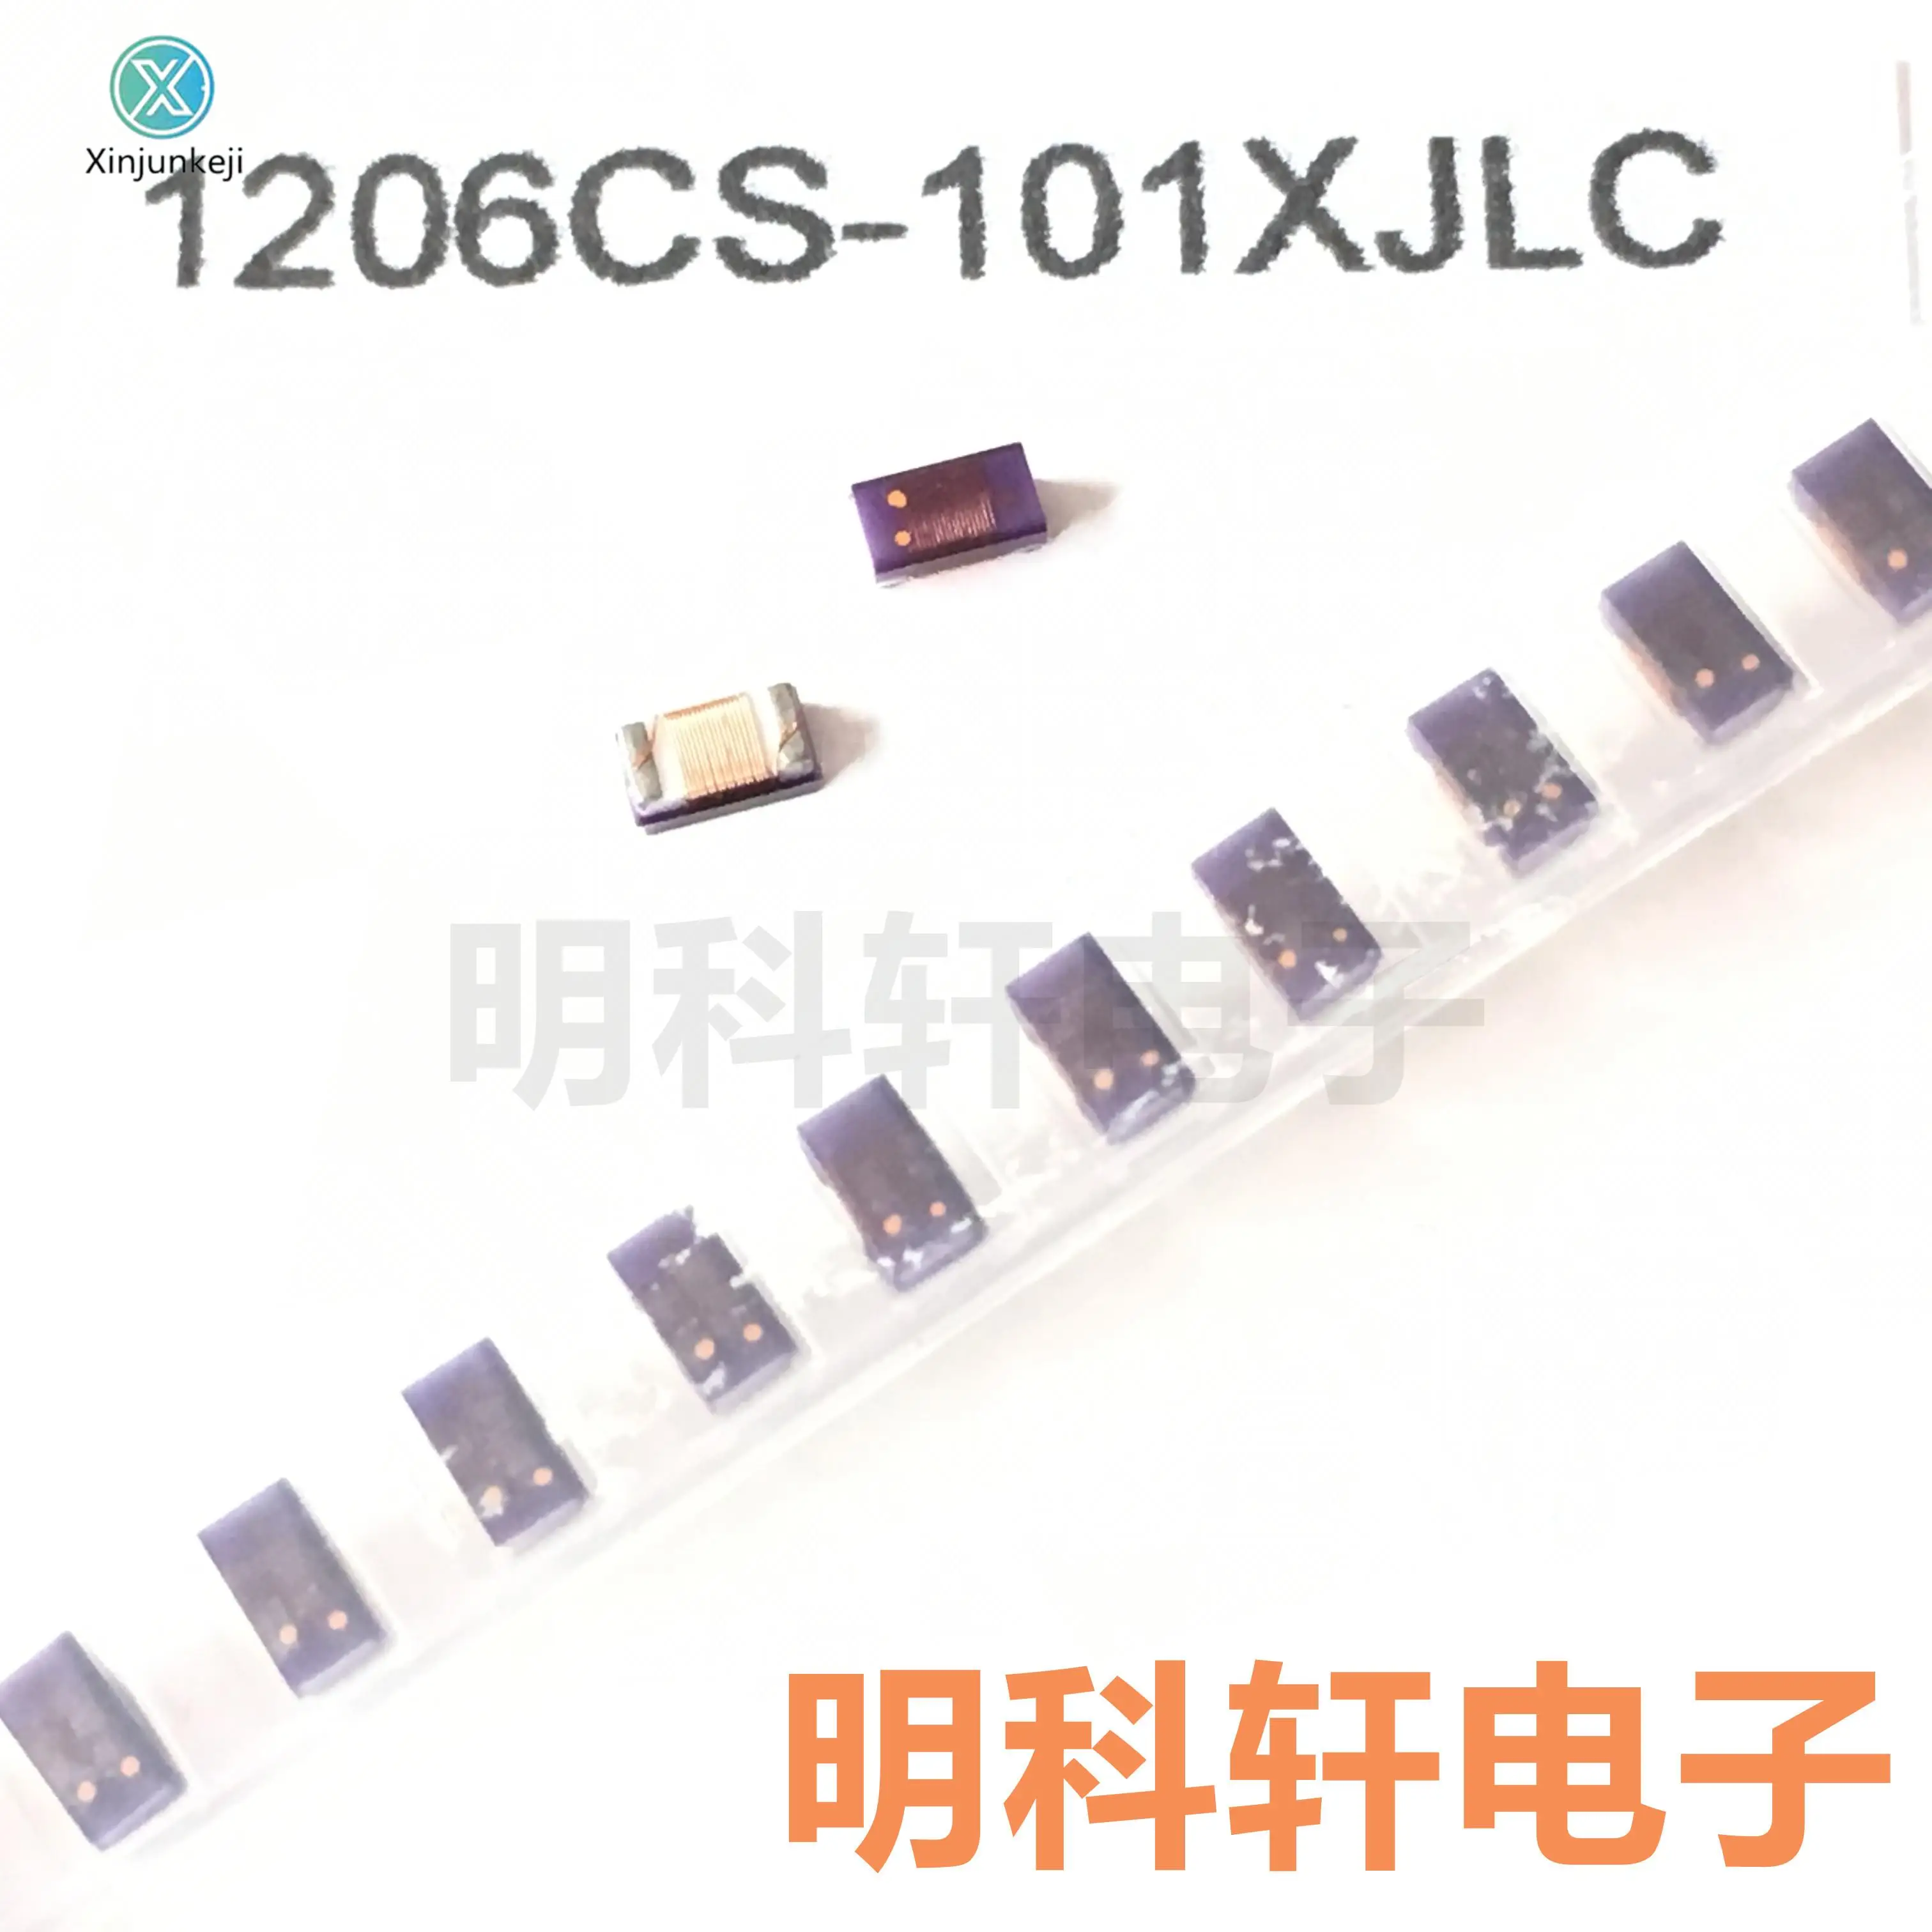 

30pcs orginal new 1206CS-101XJLC SMD high frequency wire wound inductor 1206 100NH